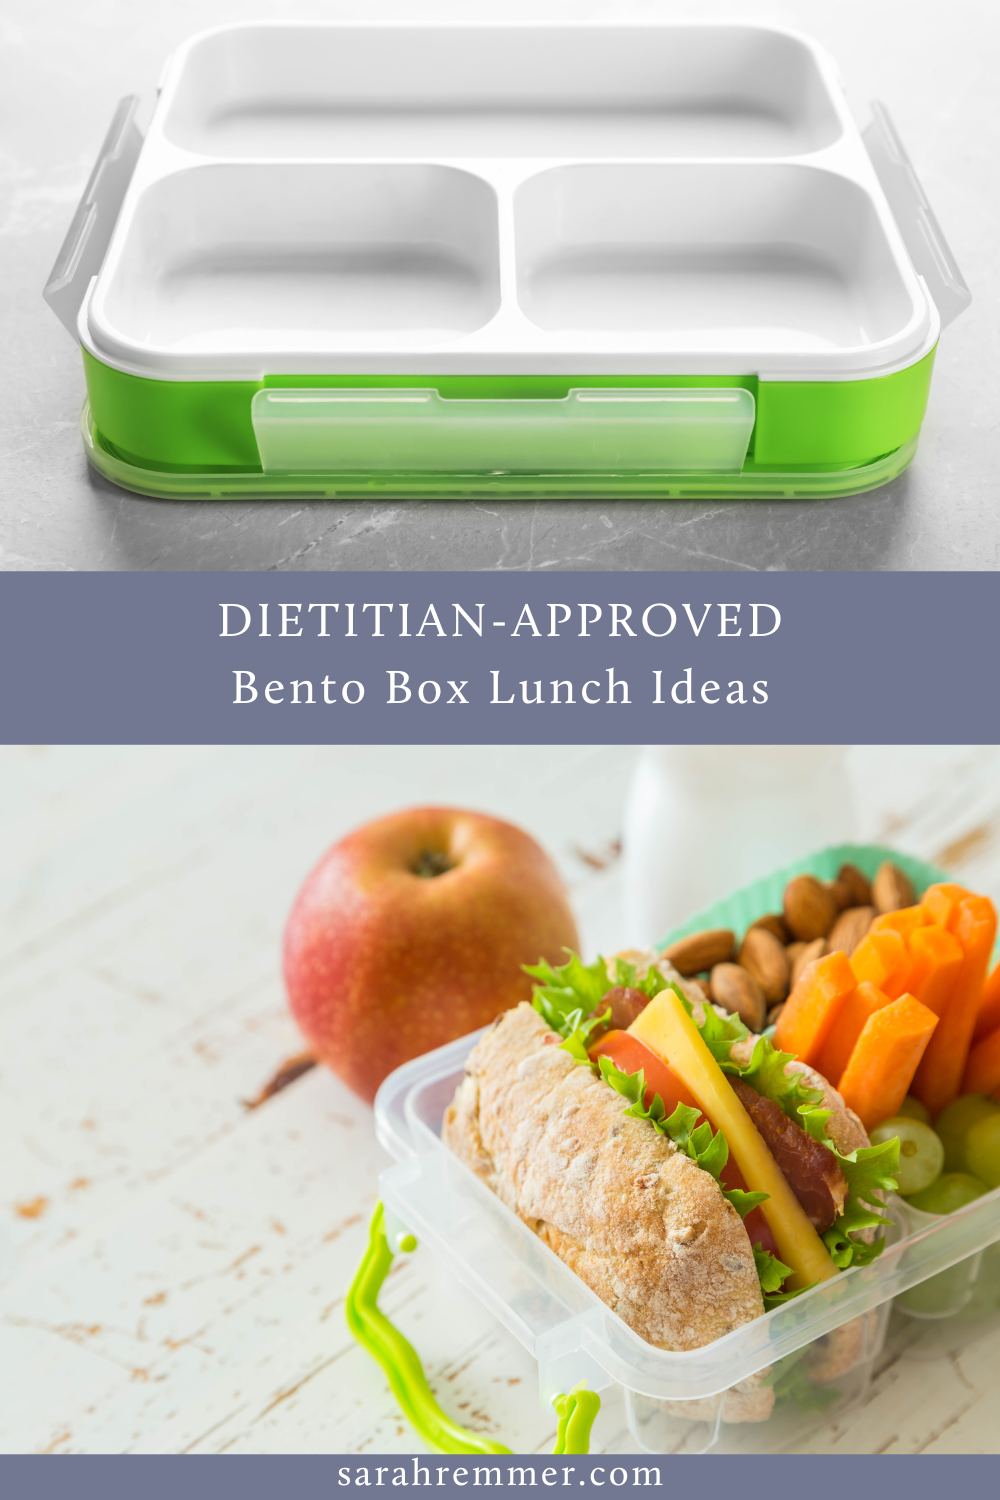 https://www.sarahremmer.com/wp-content/uploads/2023/09/Dietitian-Approved-Bento-Box-Lunch-Ideas.png